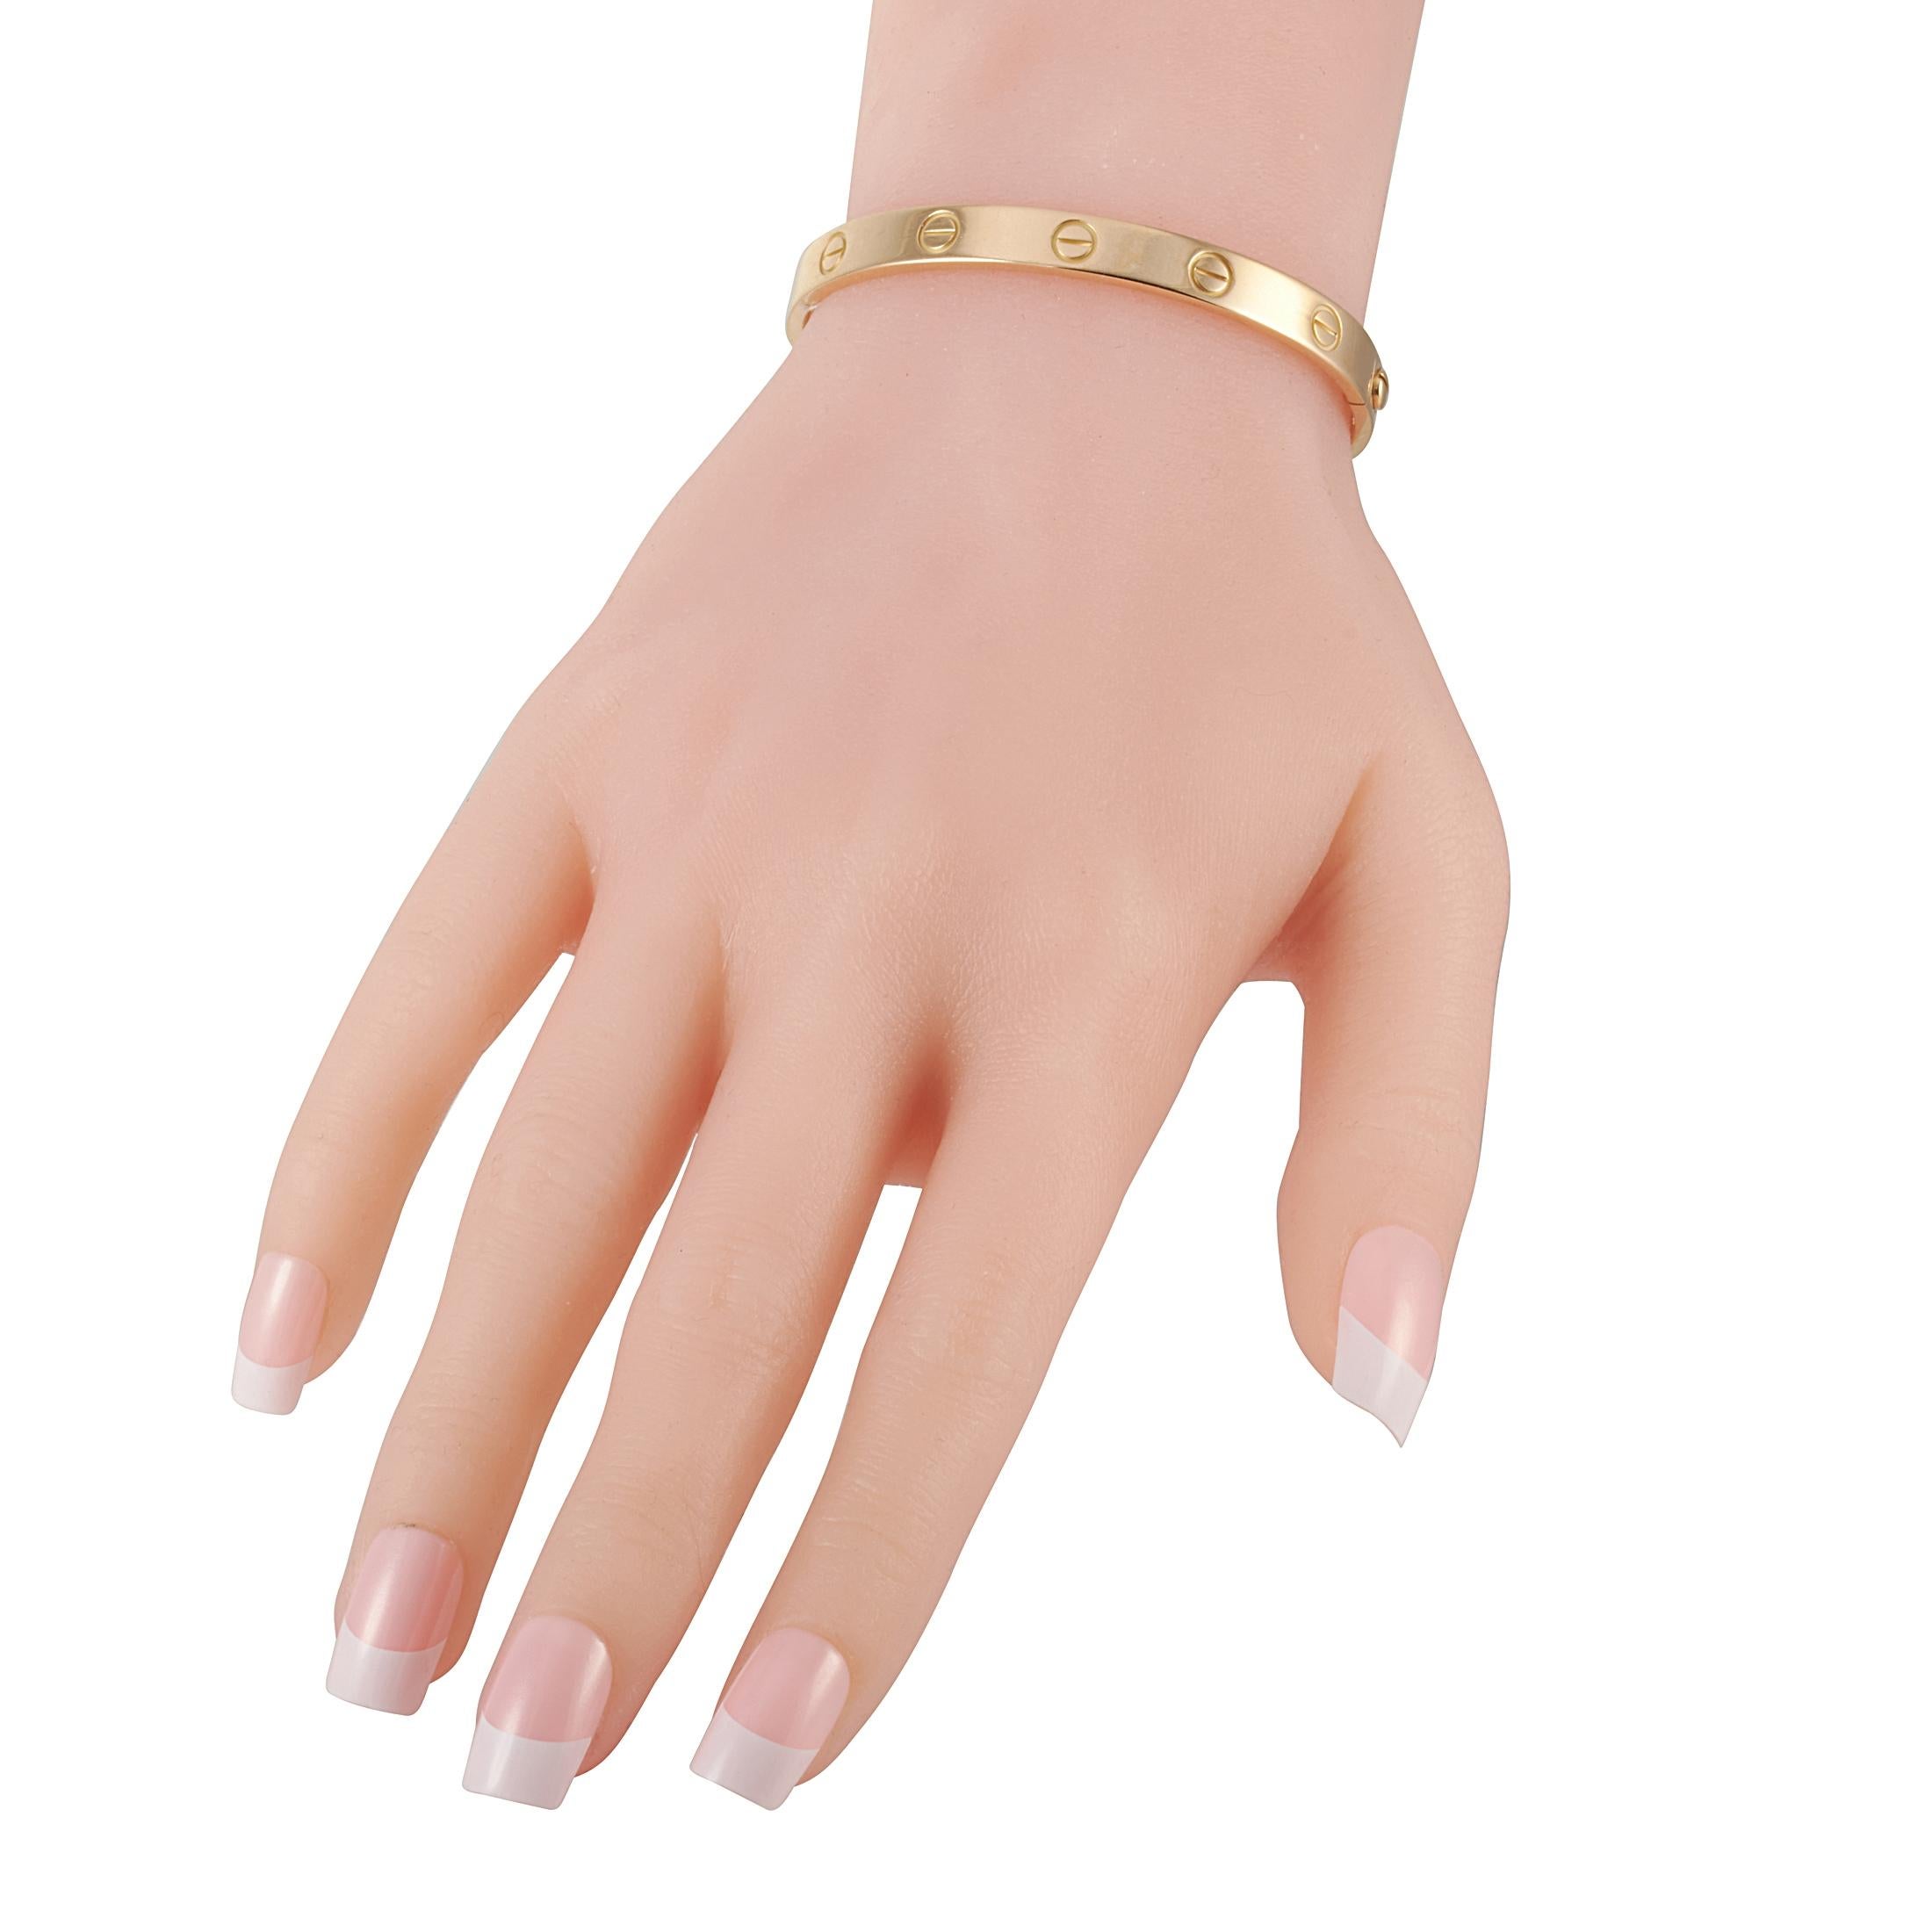 The Cartier “LOVE” bracelet is crafted from 18K yellow gold and measures 6.3” in length. The bracelet weighs 28.5 grams and is delivered with a screwdriver.

This jewelry piece is offered in estate condition and includes a gift box.